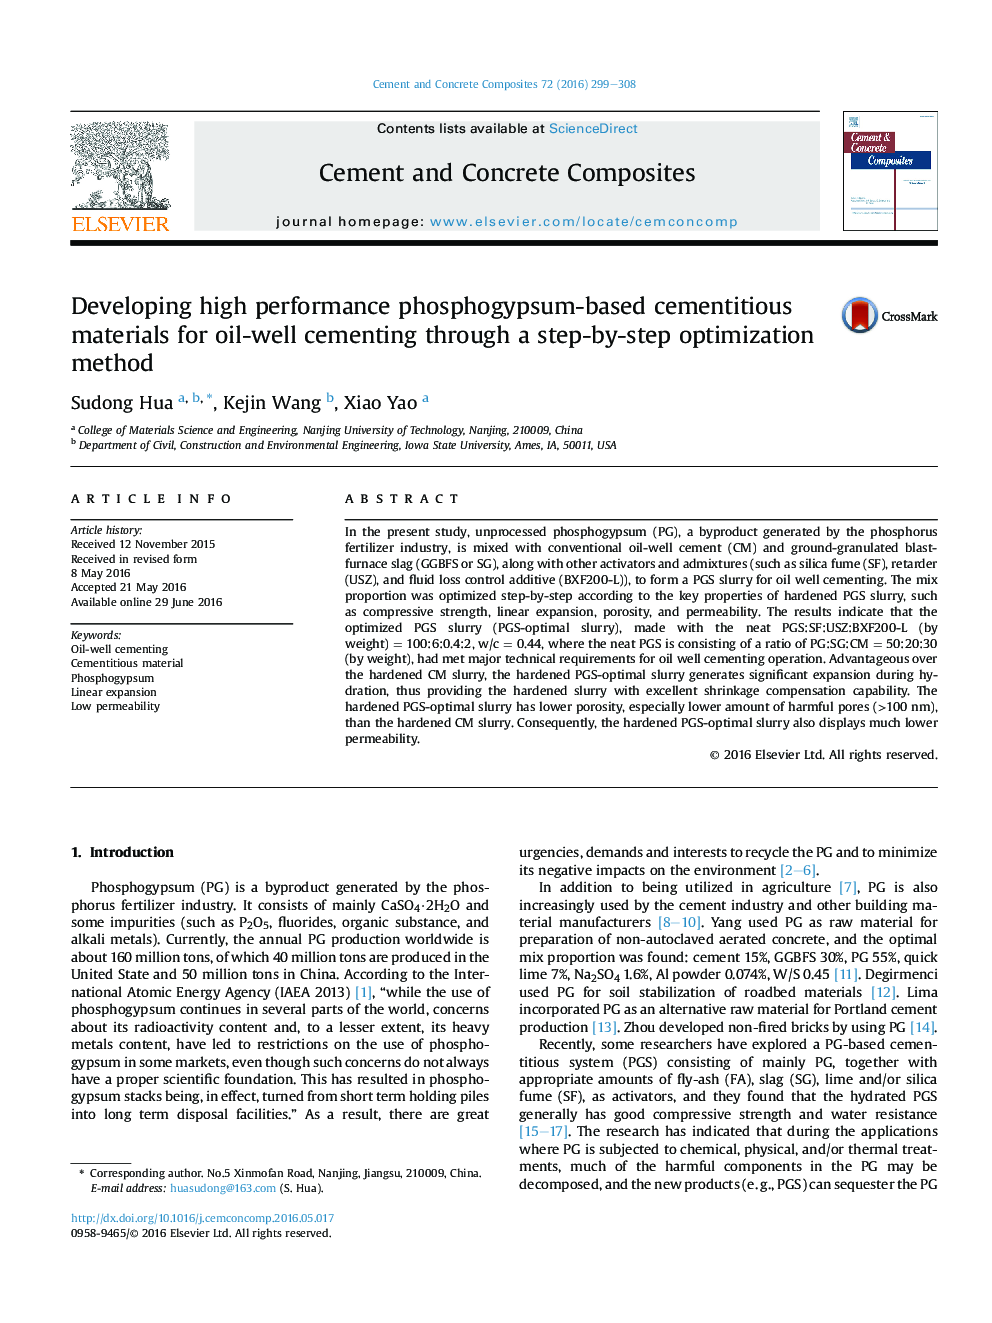 Developing high performance phosphogypsum-based cementitious materials for oil-well cementing through a step-by-step optimization method